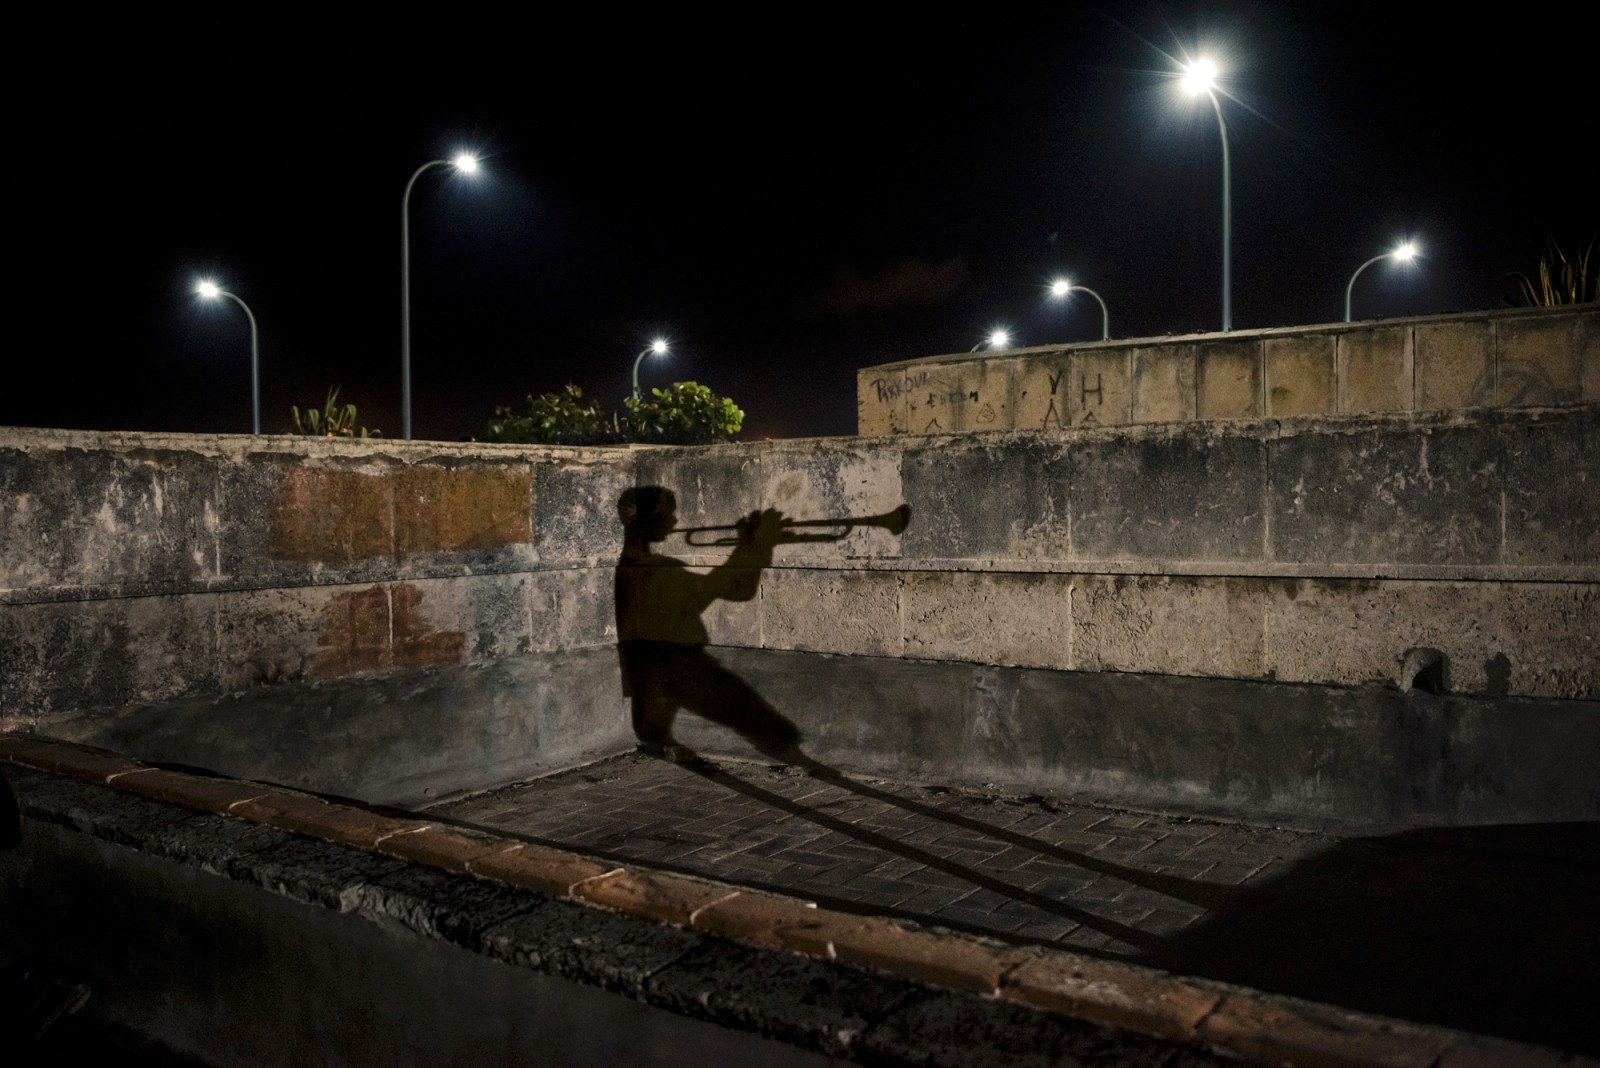 Havana, Cuba. December 2017. A 13-year-old boy, coming from Oriente province, is improvising old Cuban tunes on his trumpet on the roof of Hermanos Ameijeiras Hospital at night in central Havana. He said that most of the young people around him prefer reggaton these days and are not interested his kind of music and that makes him feel quite lonely.